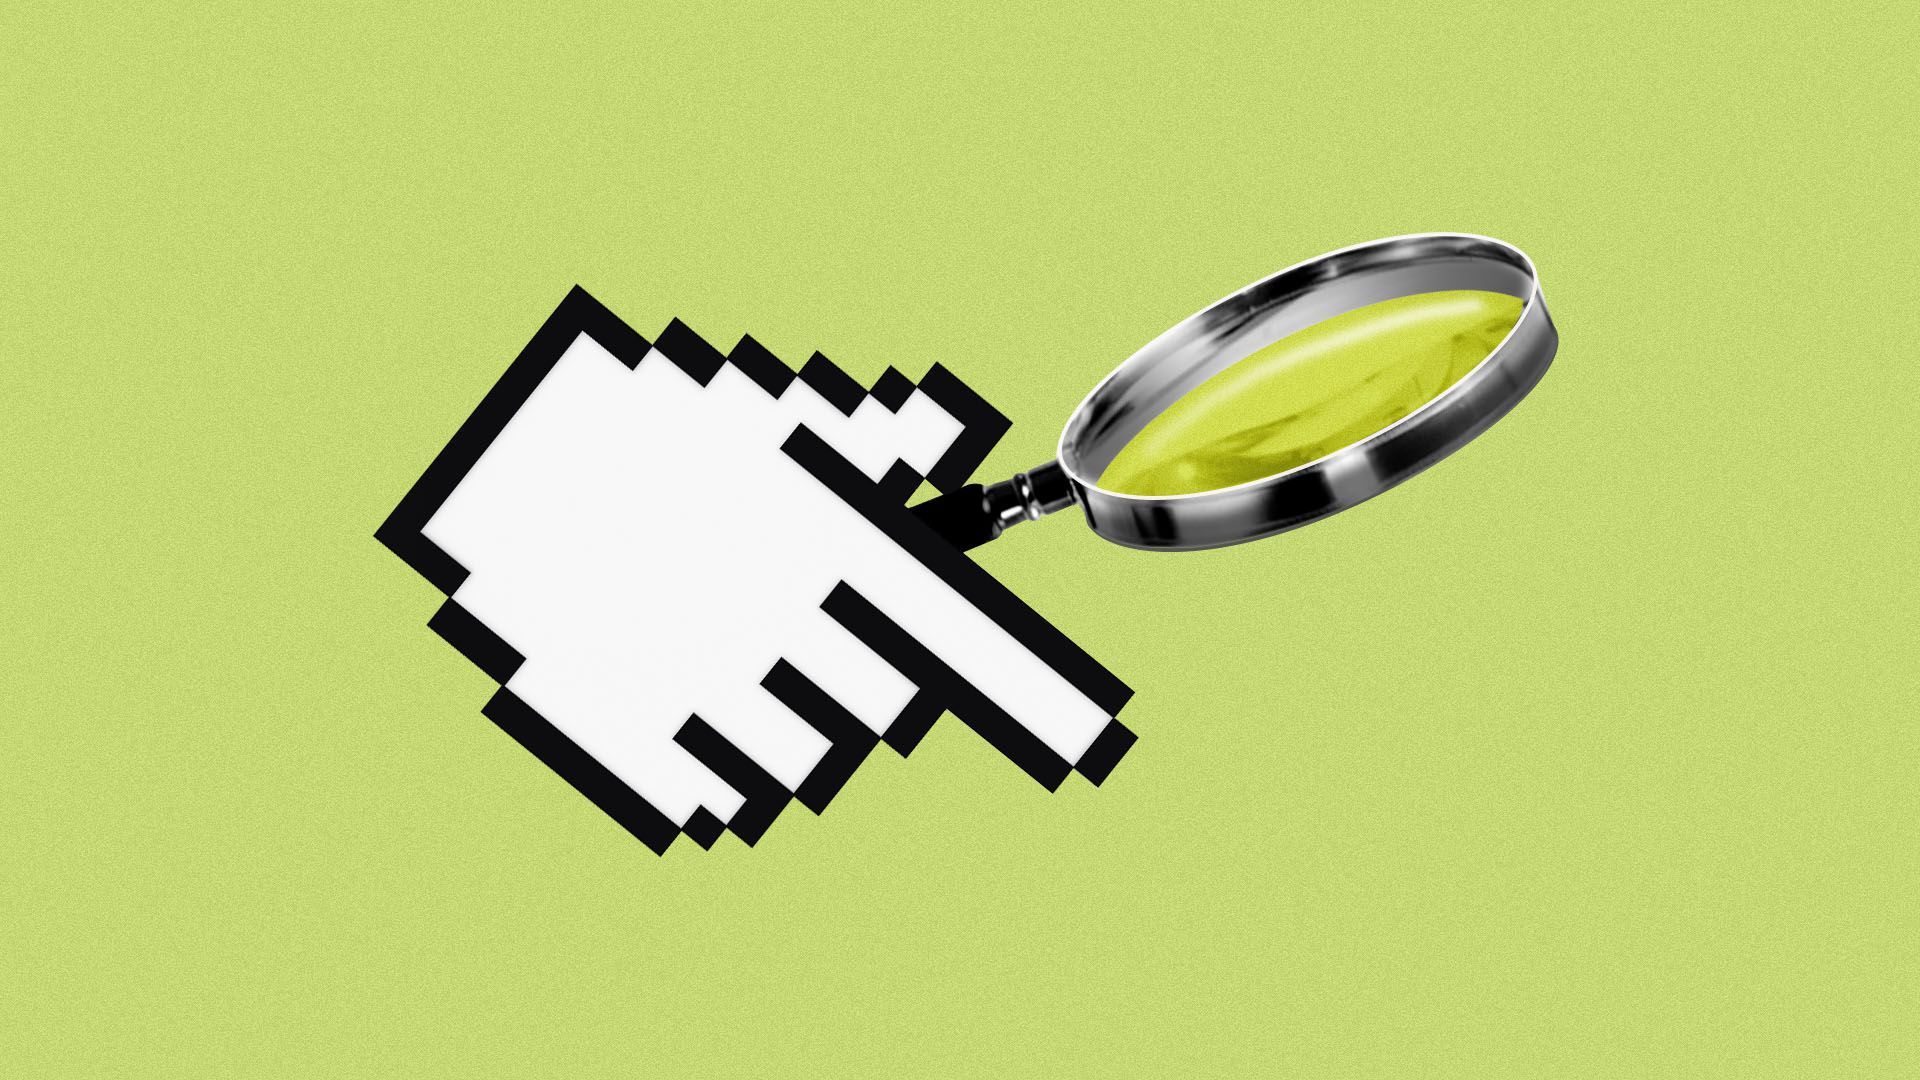 An illustration of a cursor hand holding a magnifying glass